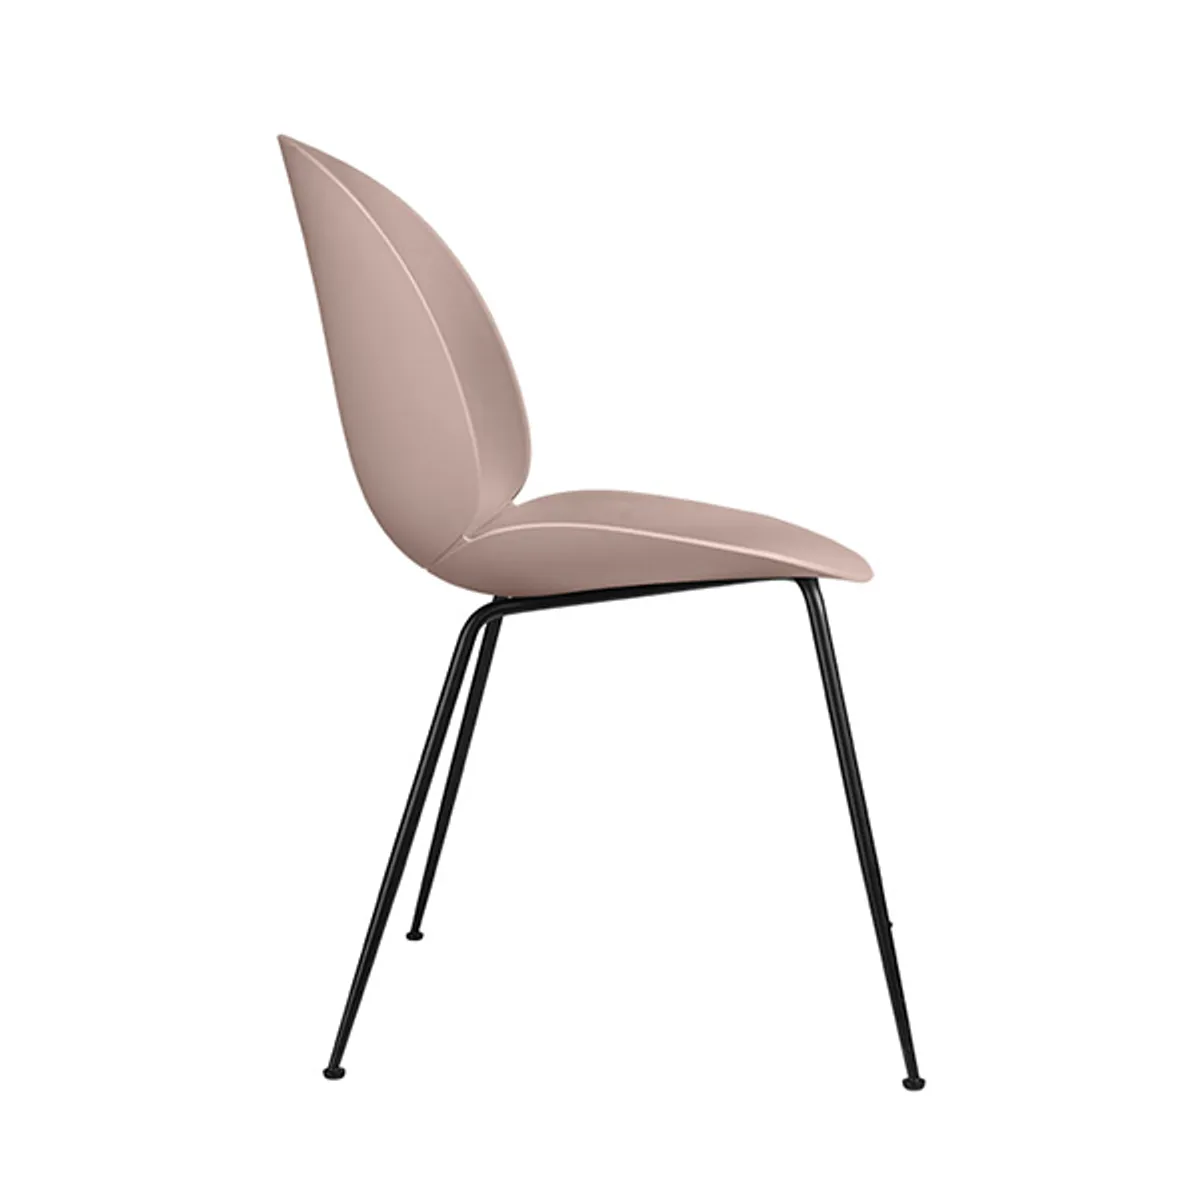 Beetle Side Chair Metal Legs Poly Seat Dustypink Inside Out Contracts Jp